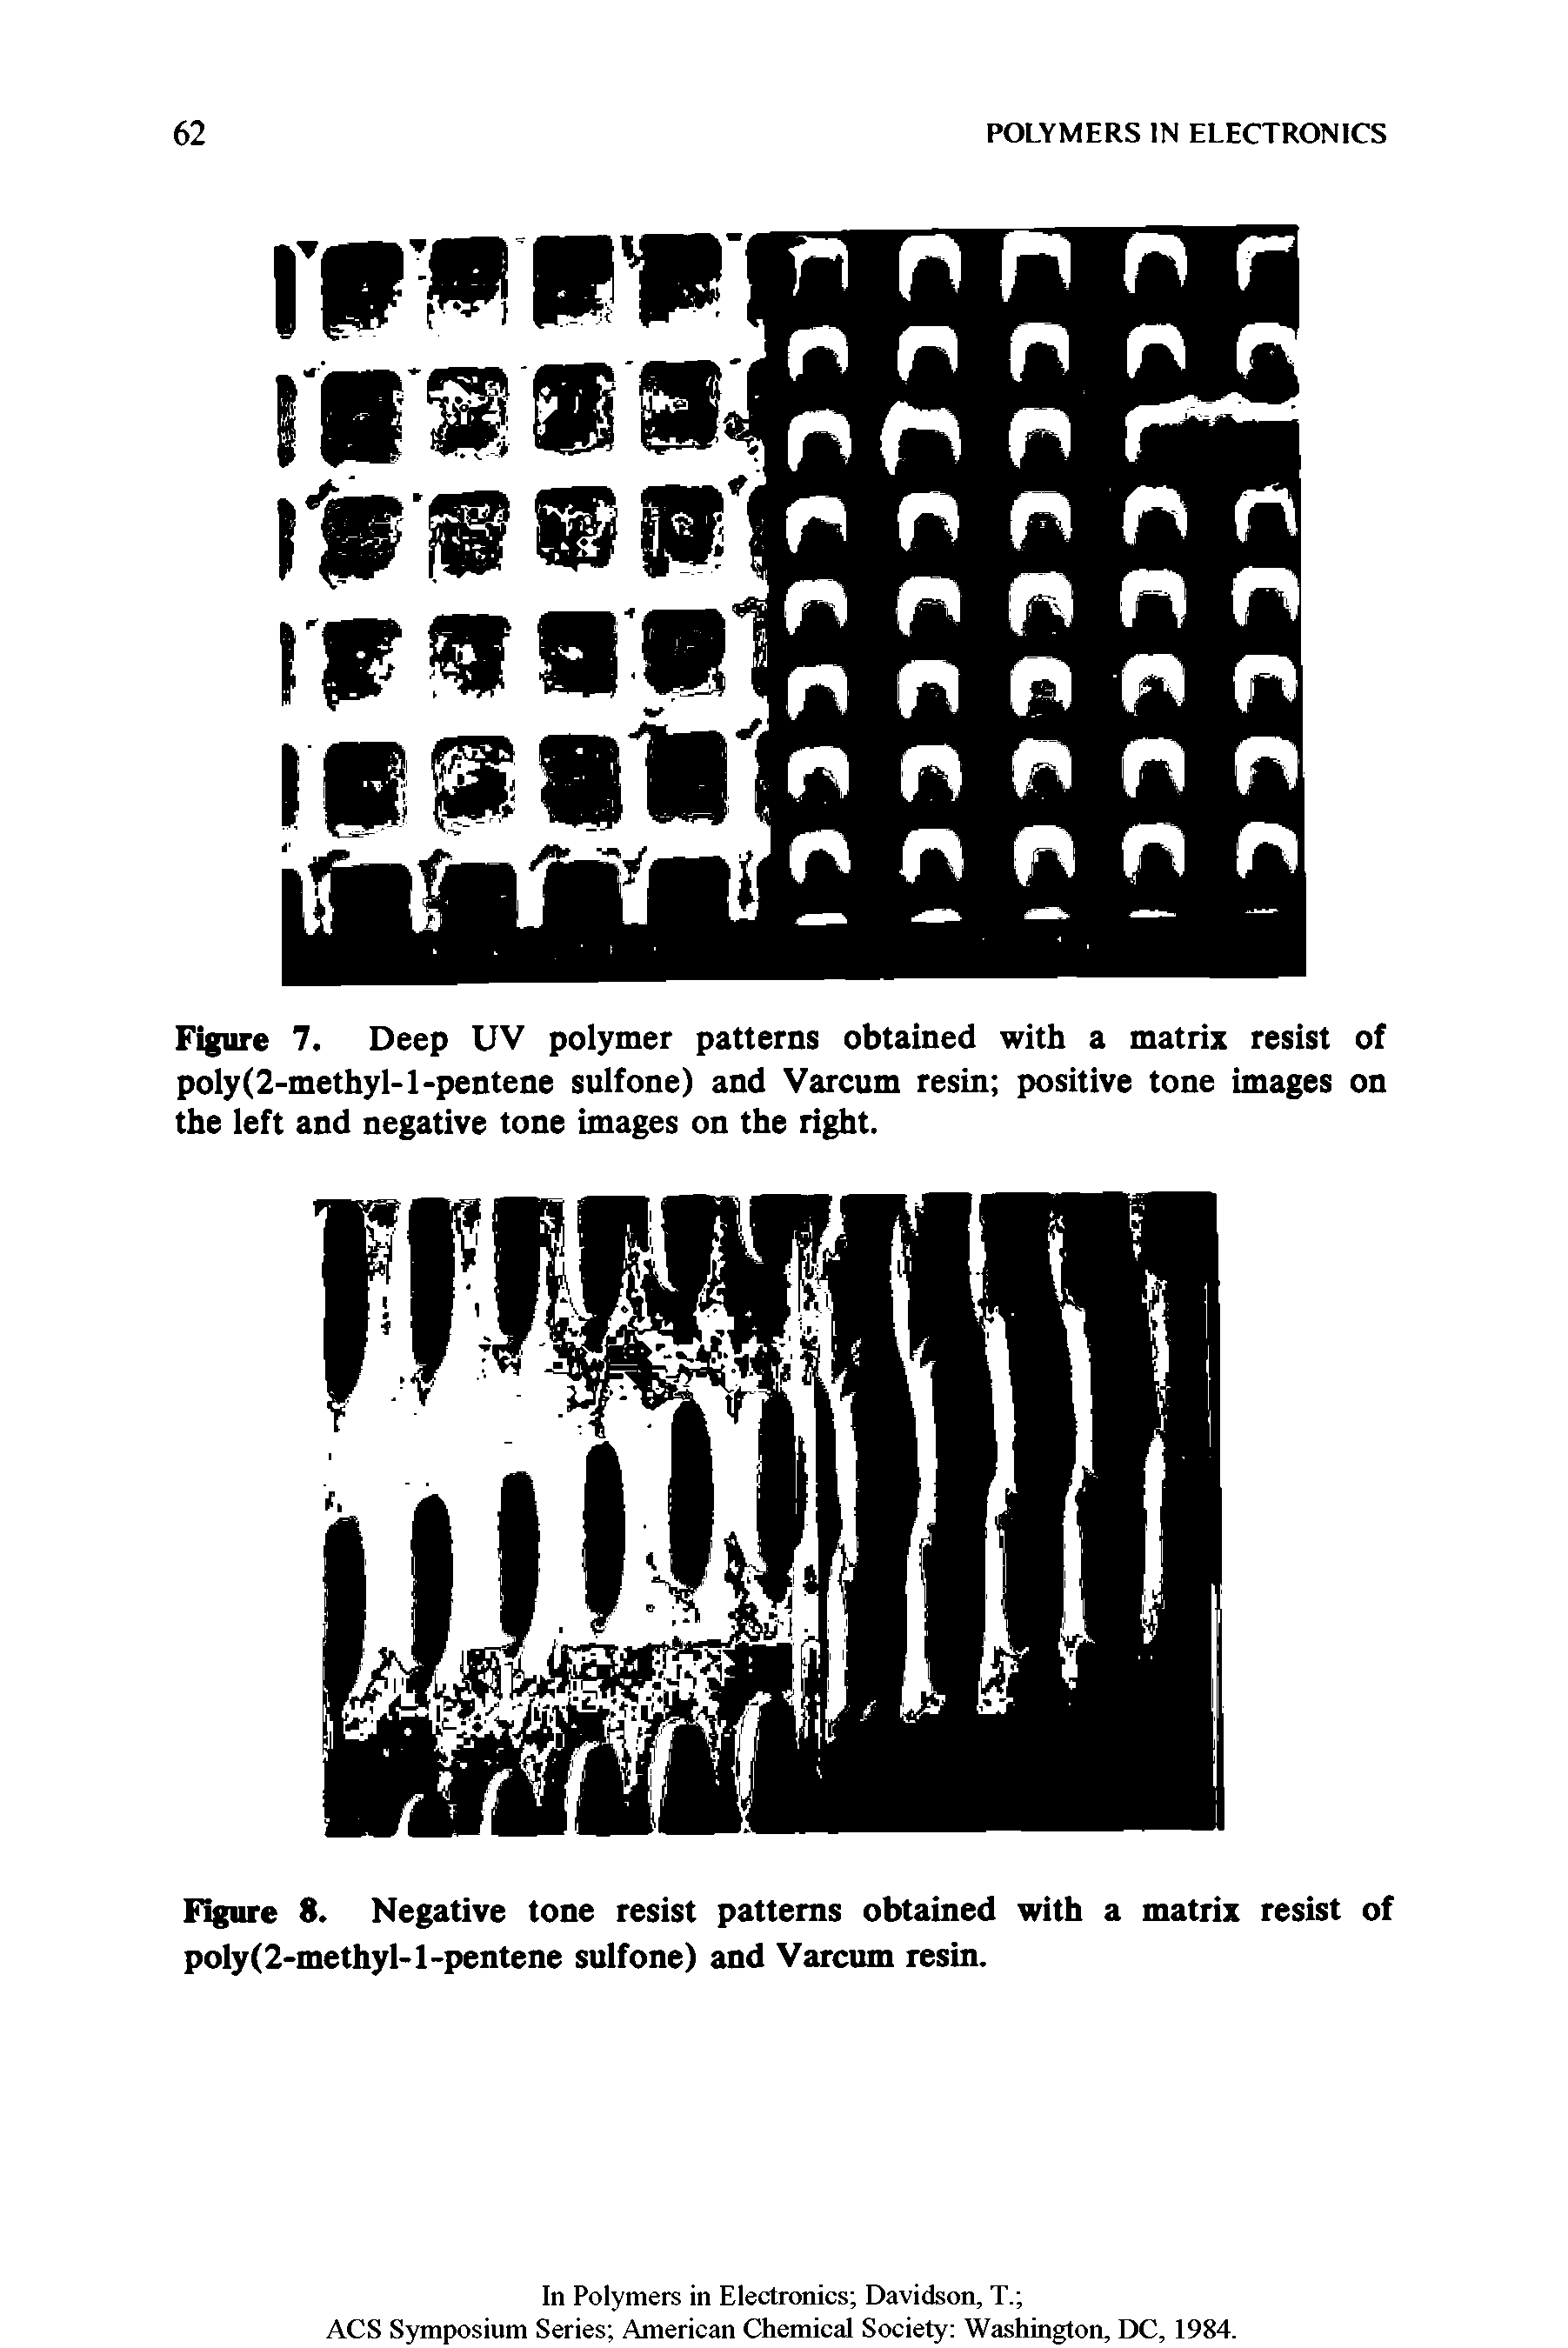 Figure 7. Deep UV polymer patterns obtained with a matrix resist of poly(2-methyl-l-pentene sulfone) and Varcum resin positive tone images on the left and negative tone images on the right.